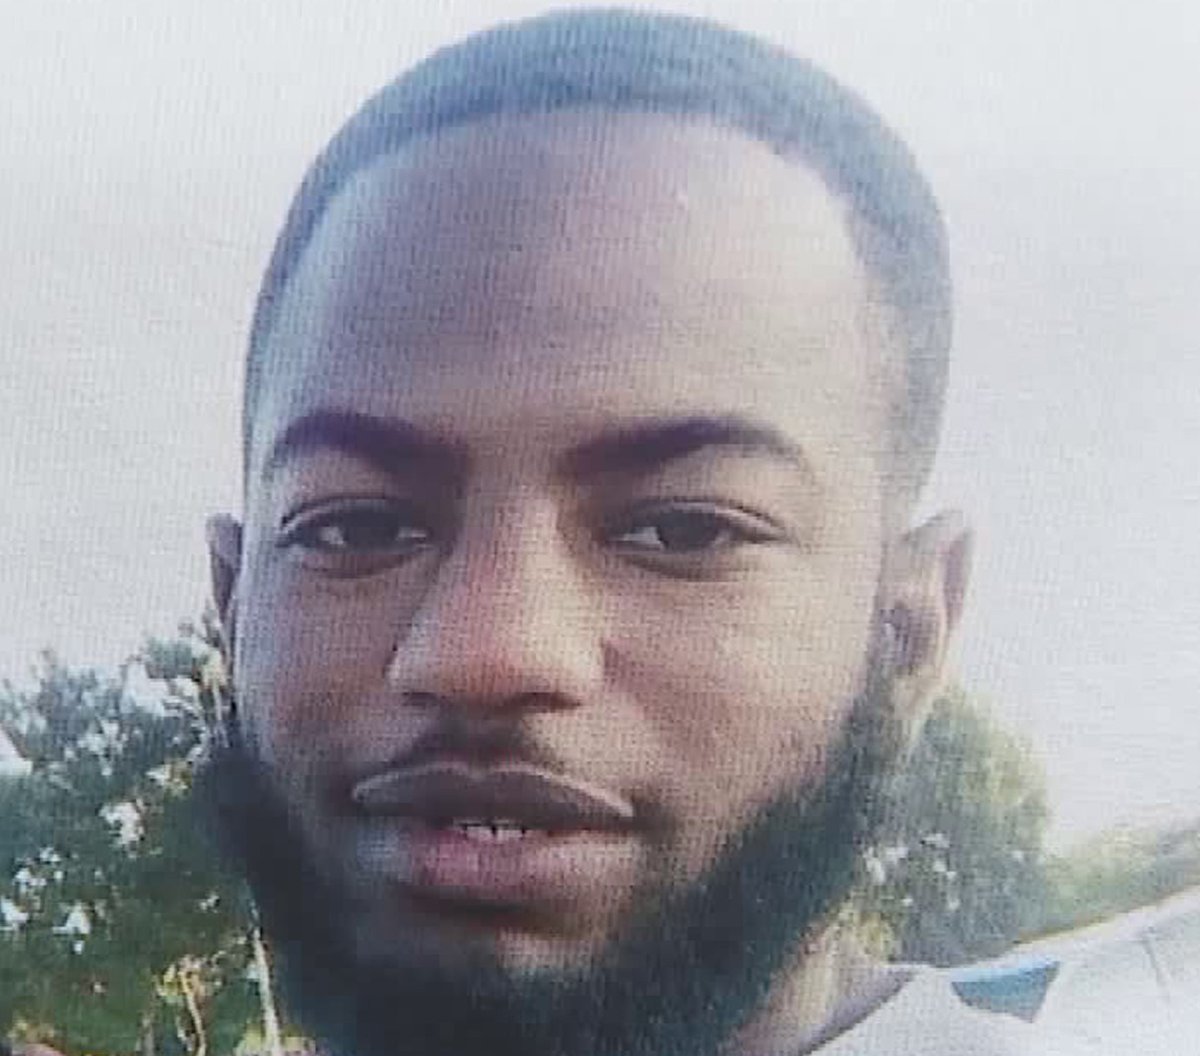 71. Ryan Twyman, age 24, died June 6, 2019Racially profiled while sitting in his parked car. It took 2 officers 50 seconds to shoot him 34 times in his front seat.  #justiceforryantwyman  #ryantwyman  #sayhisname  #blacklivesmatter  